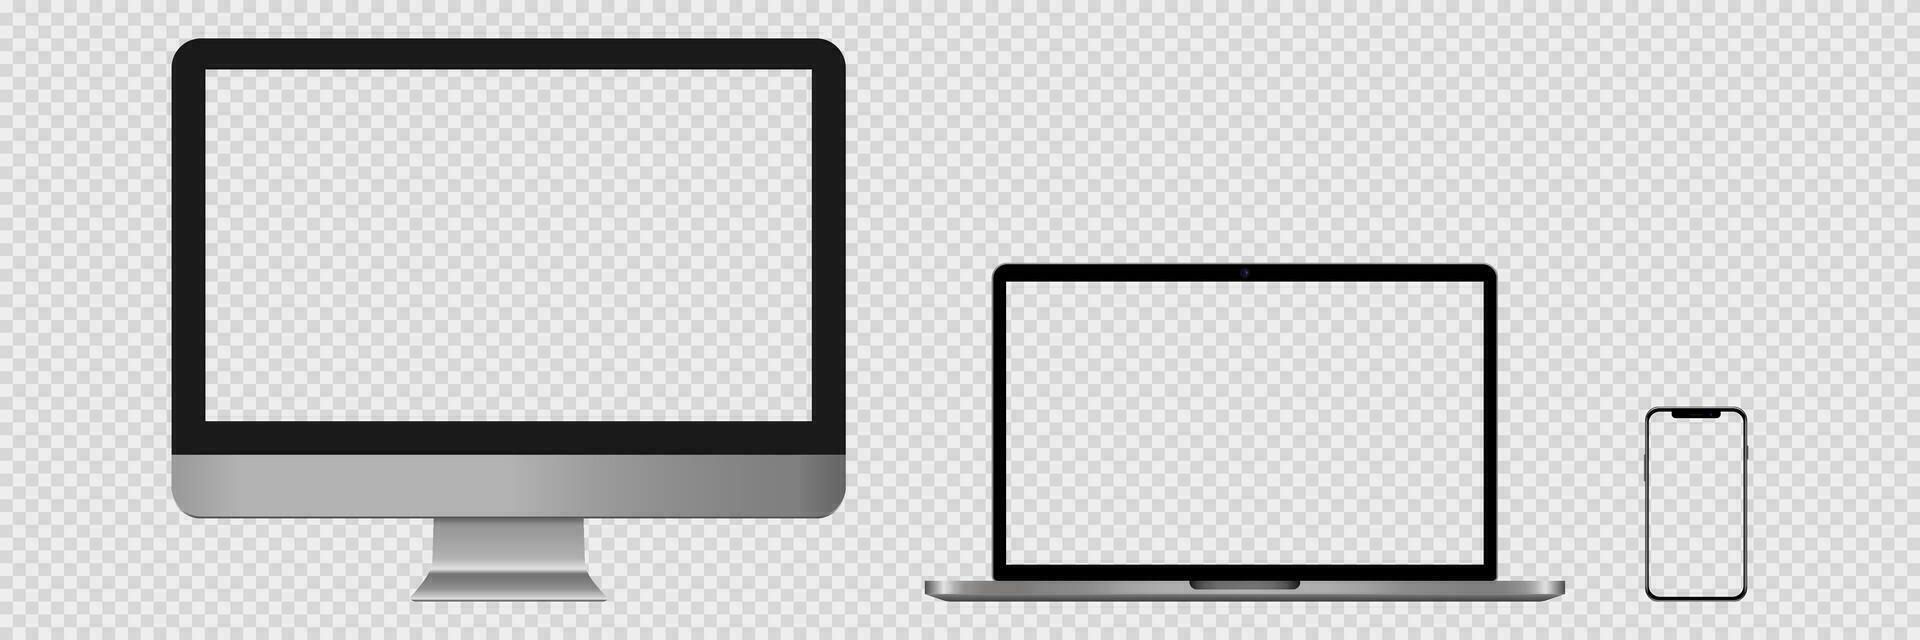 Desktop and laptop mockup. Isolated smartphone icon. Notebook mockup. Computer screen. vector